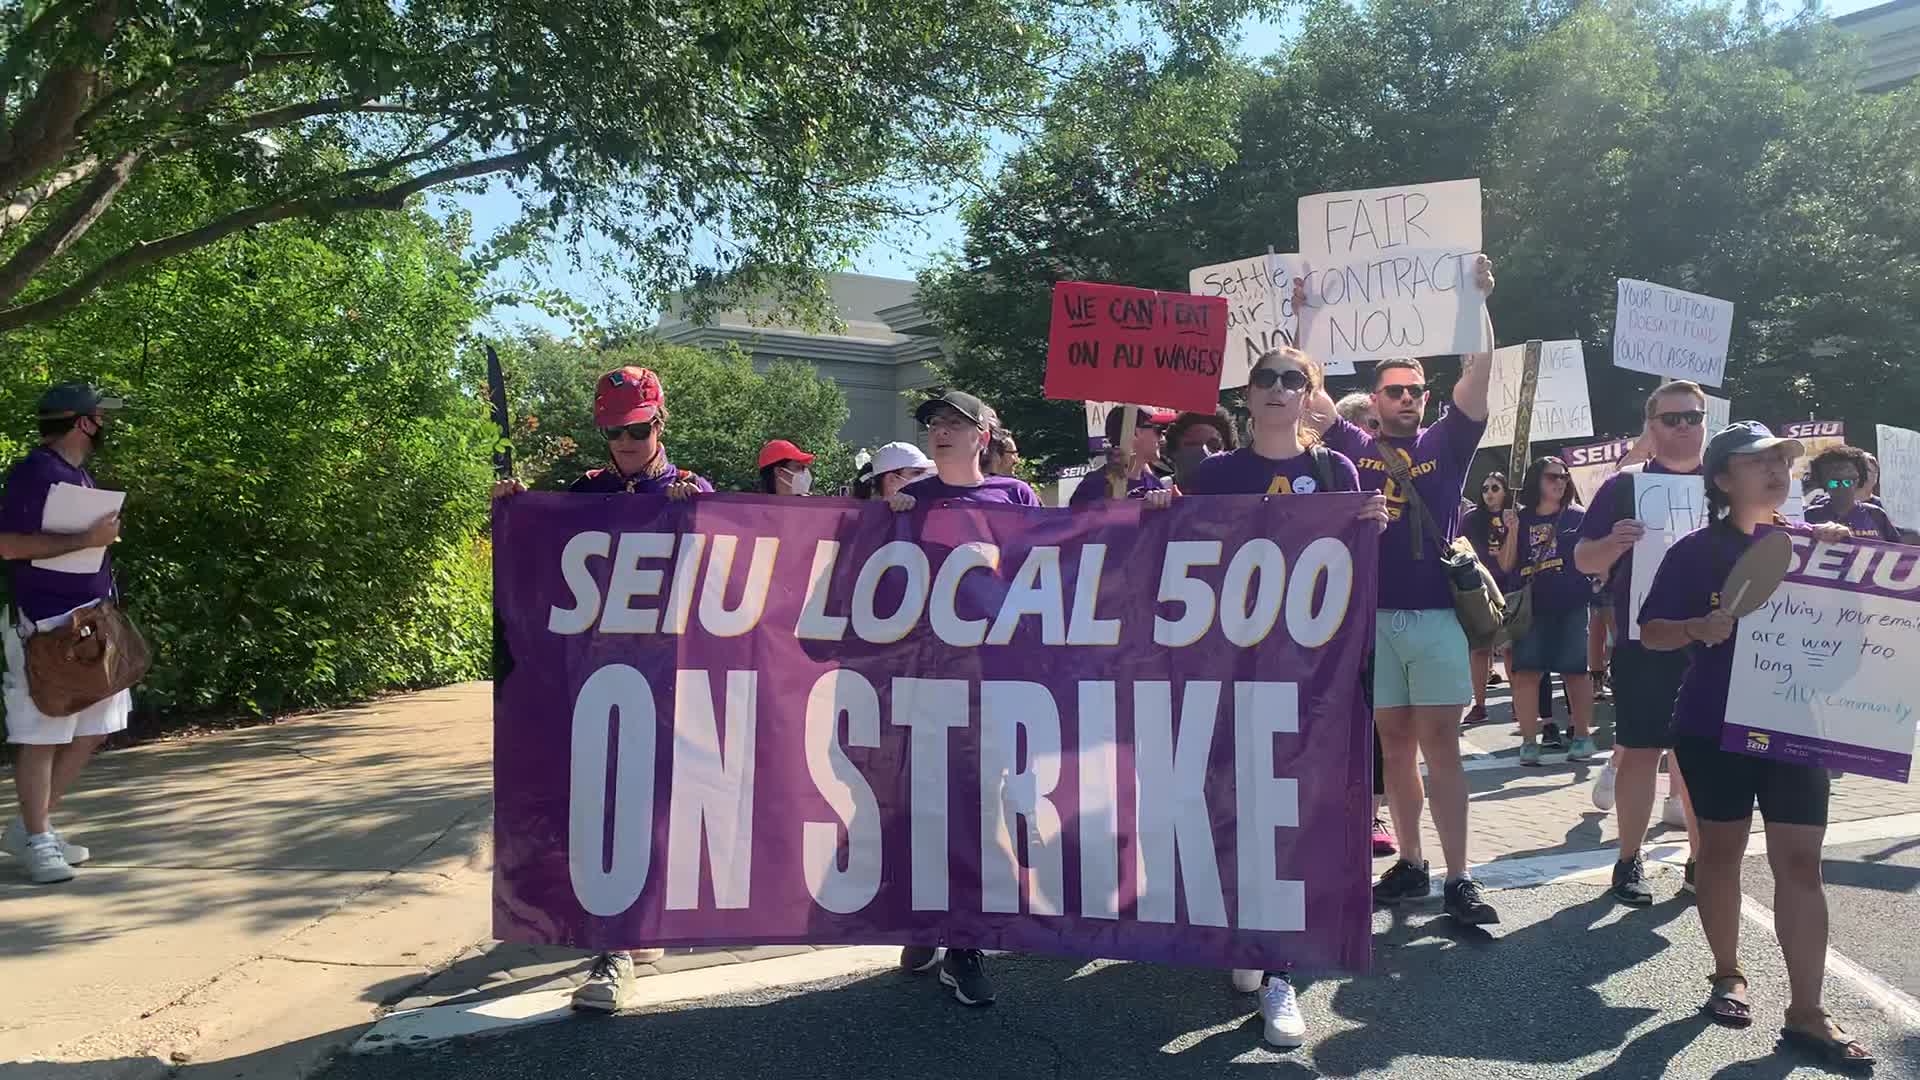 Video of the Strike (18)